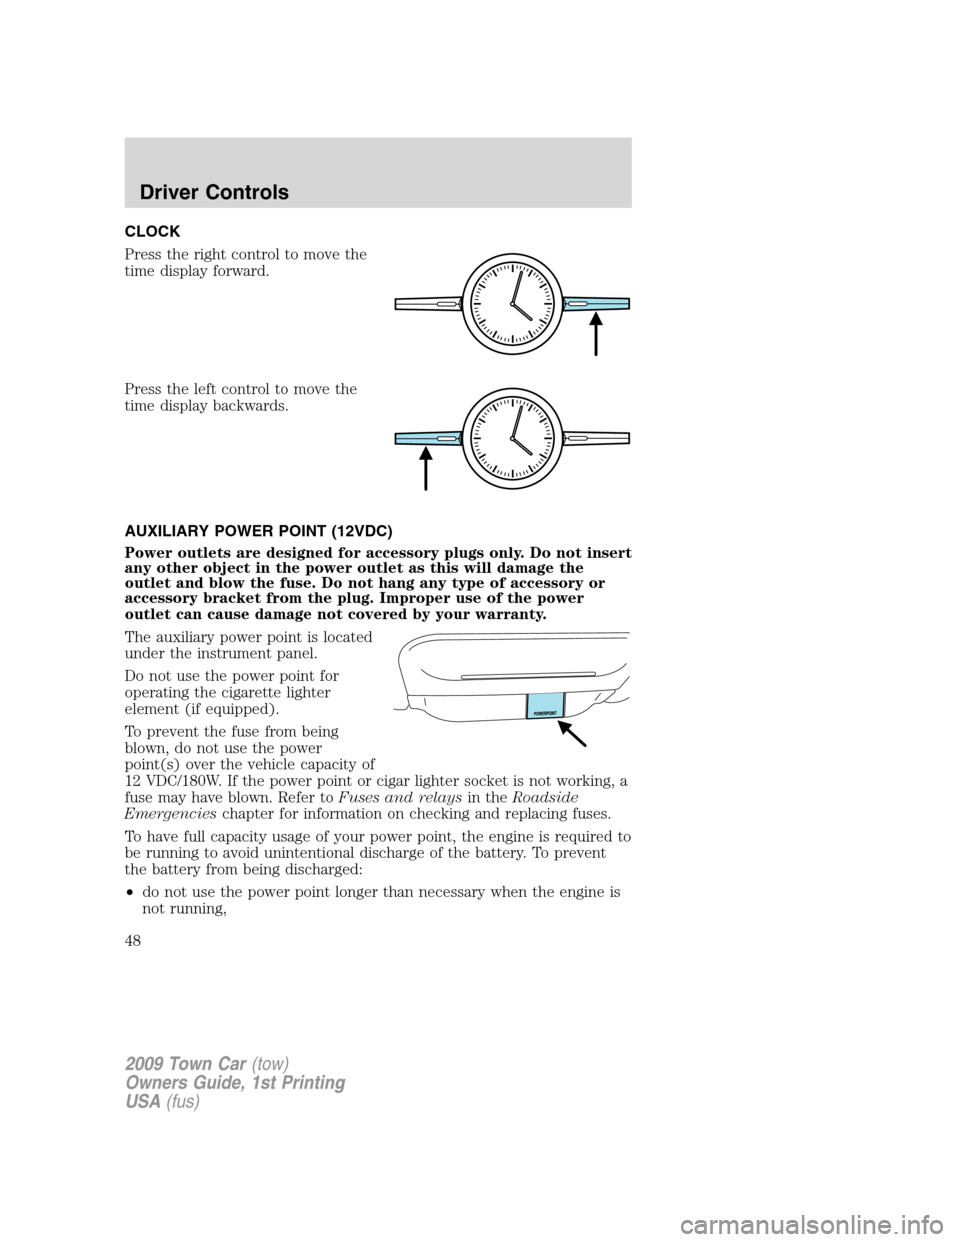 LINCOLN TOWN CAR 2009 Service Manual CLOCK
Press the right control to move the
time display forward.
Press the left control to move the
time display backwards.
AUXILIARY POWER POINT (12VDC)
Power outlets are designed for accessory plugs 